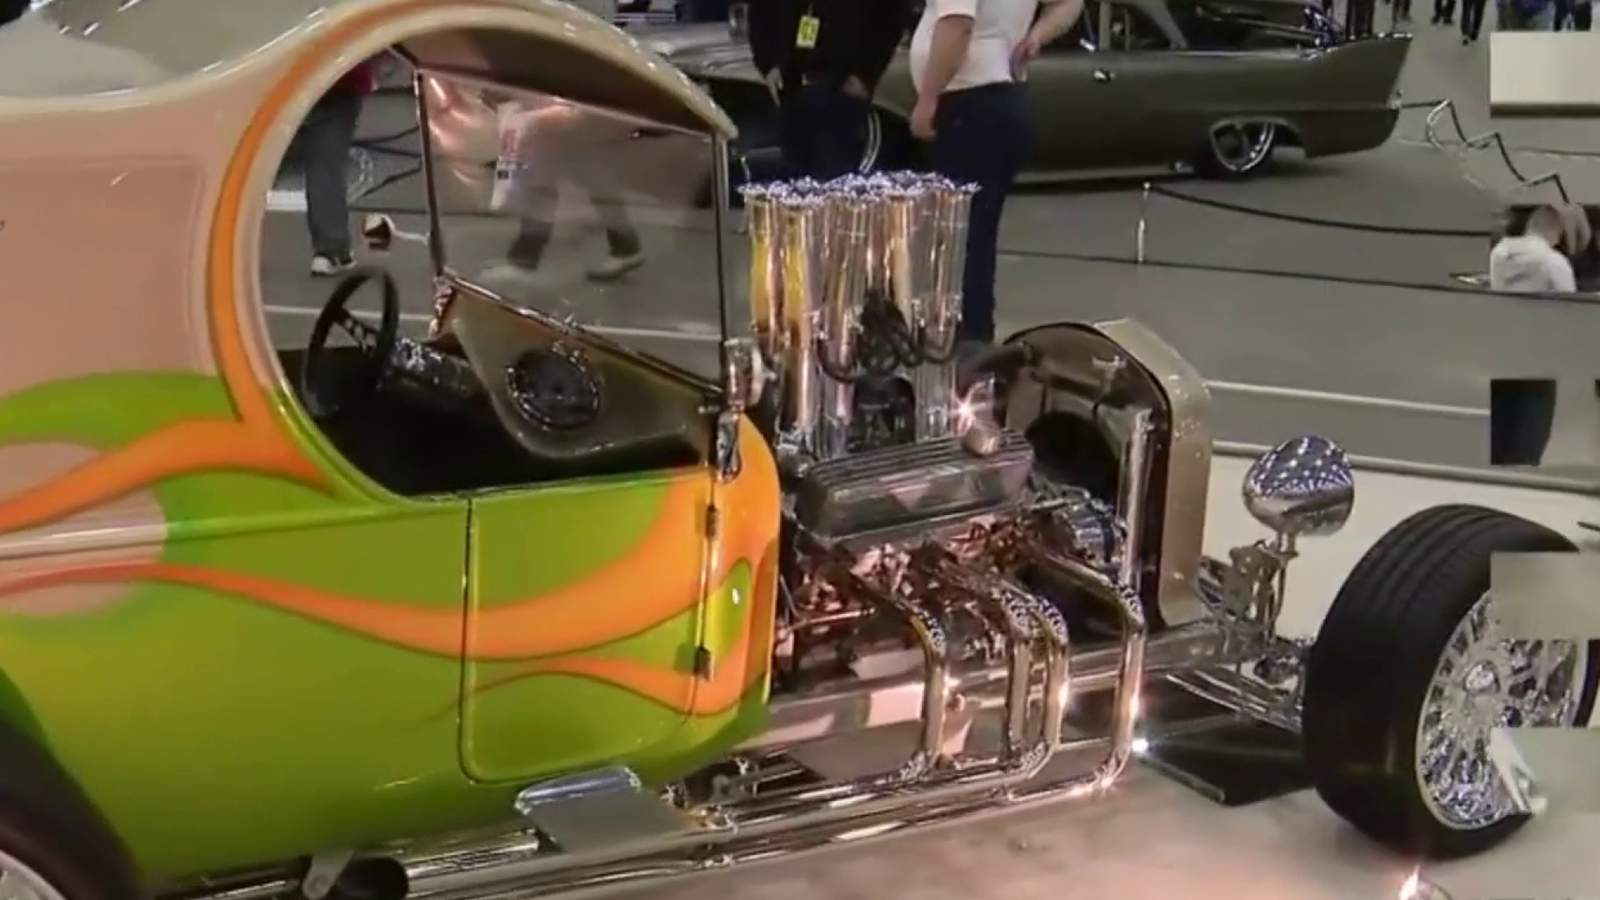 68th annual Detroit Autorama taking place this weekend